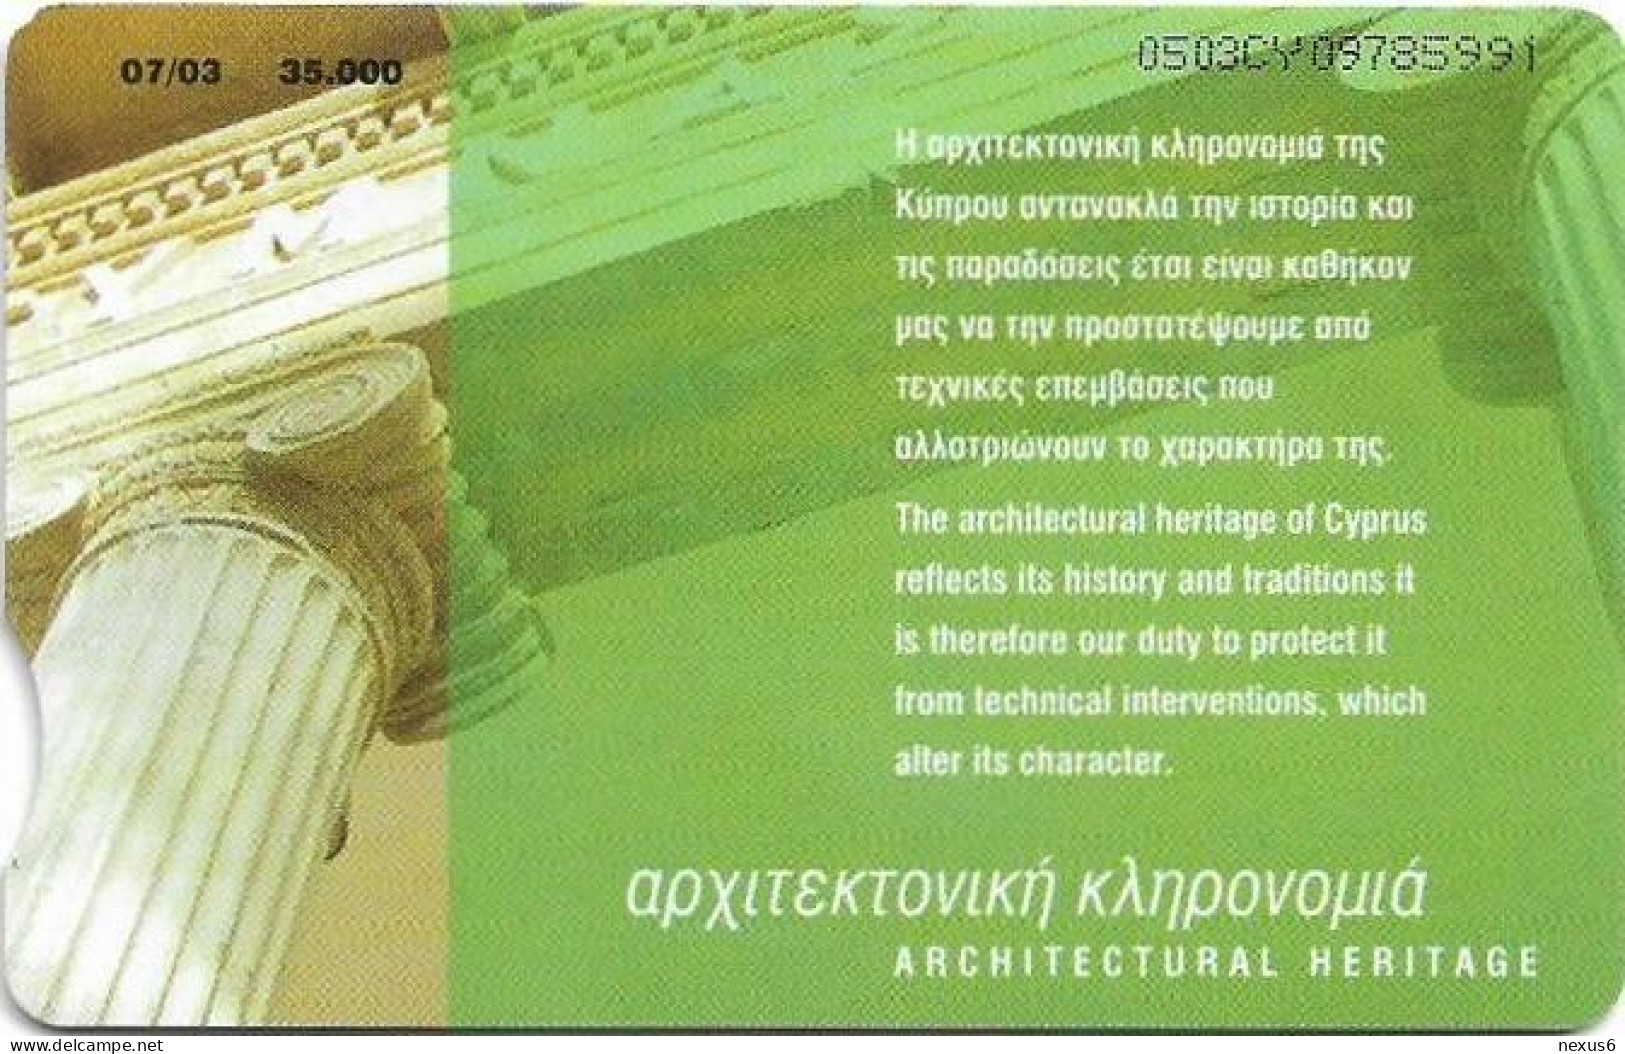 Cyprus - Cyta (Chip) - Architectural Heritage - 07.2003, 35.000ex, Used - Cipro